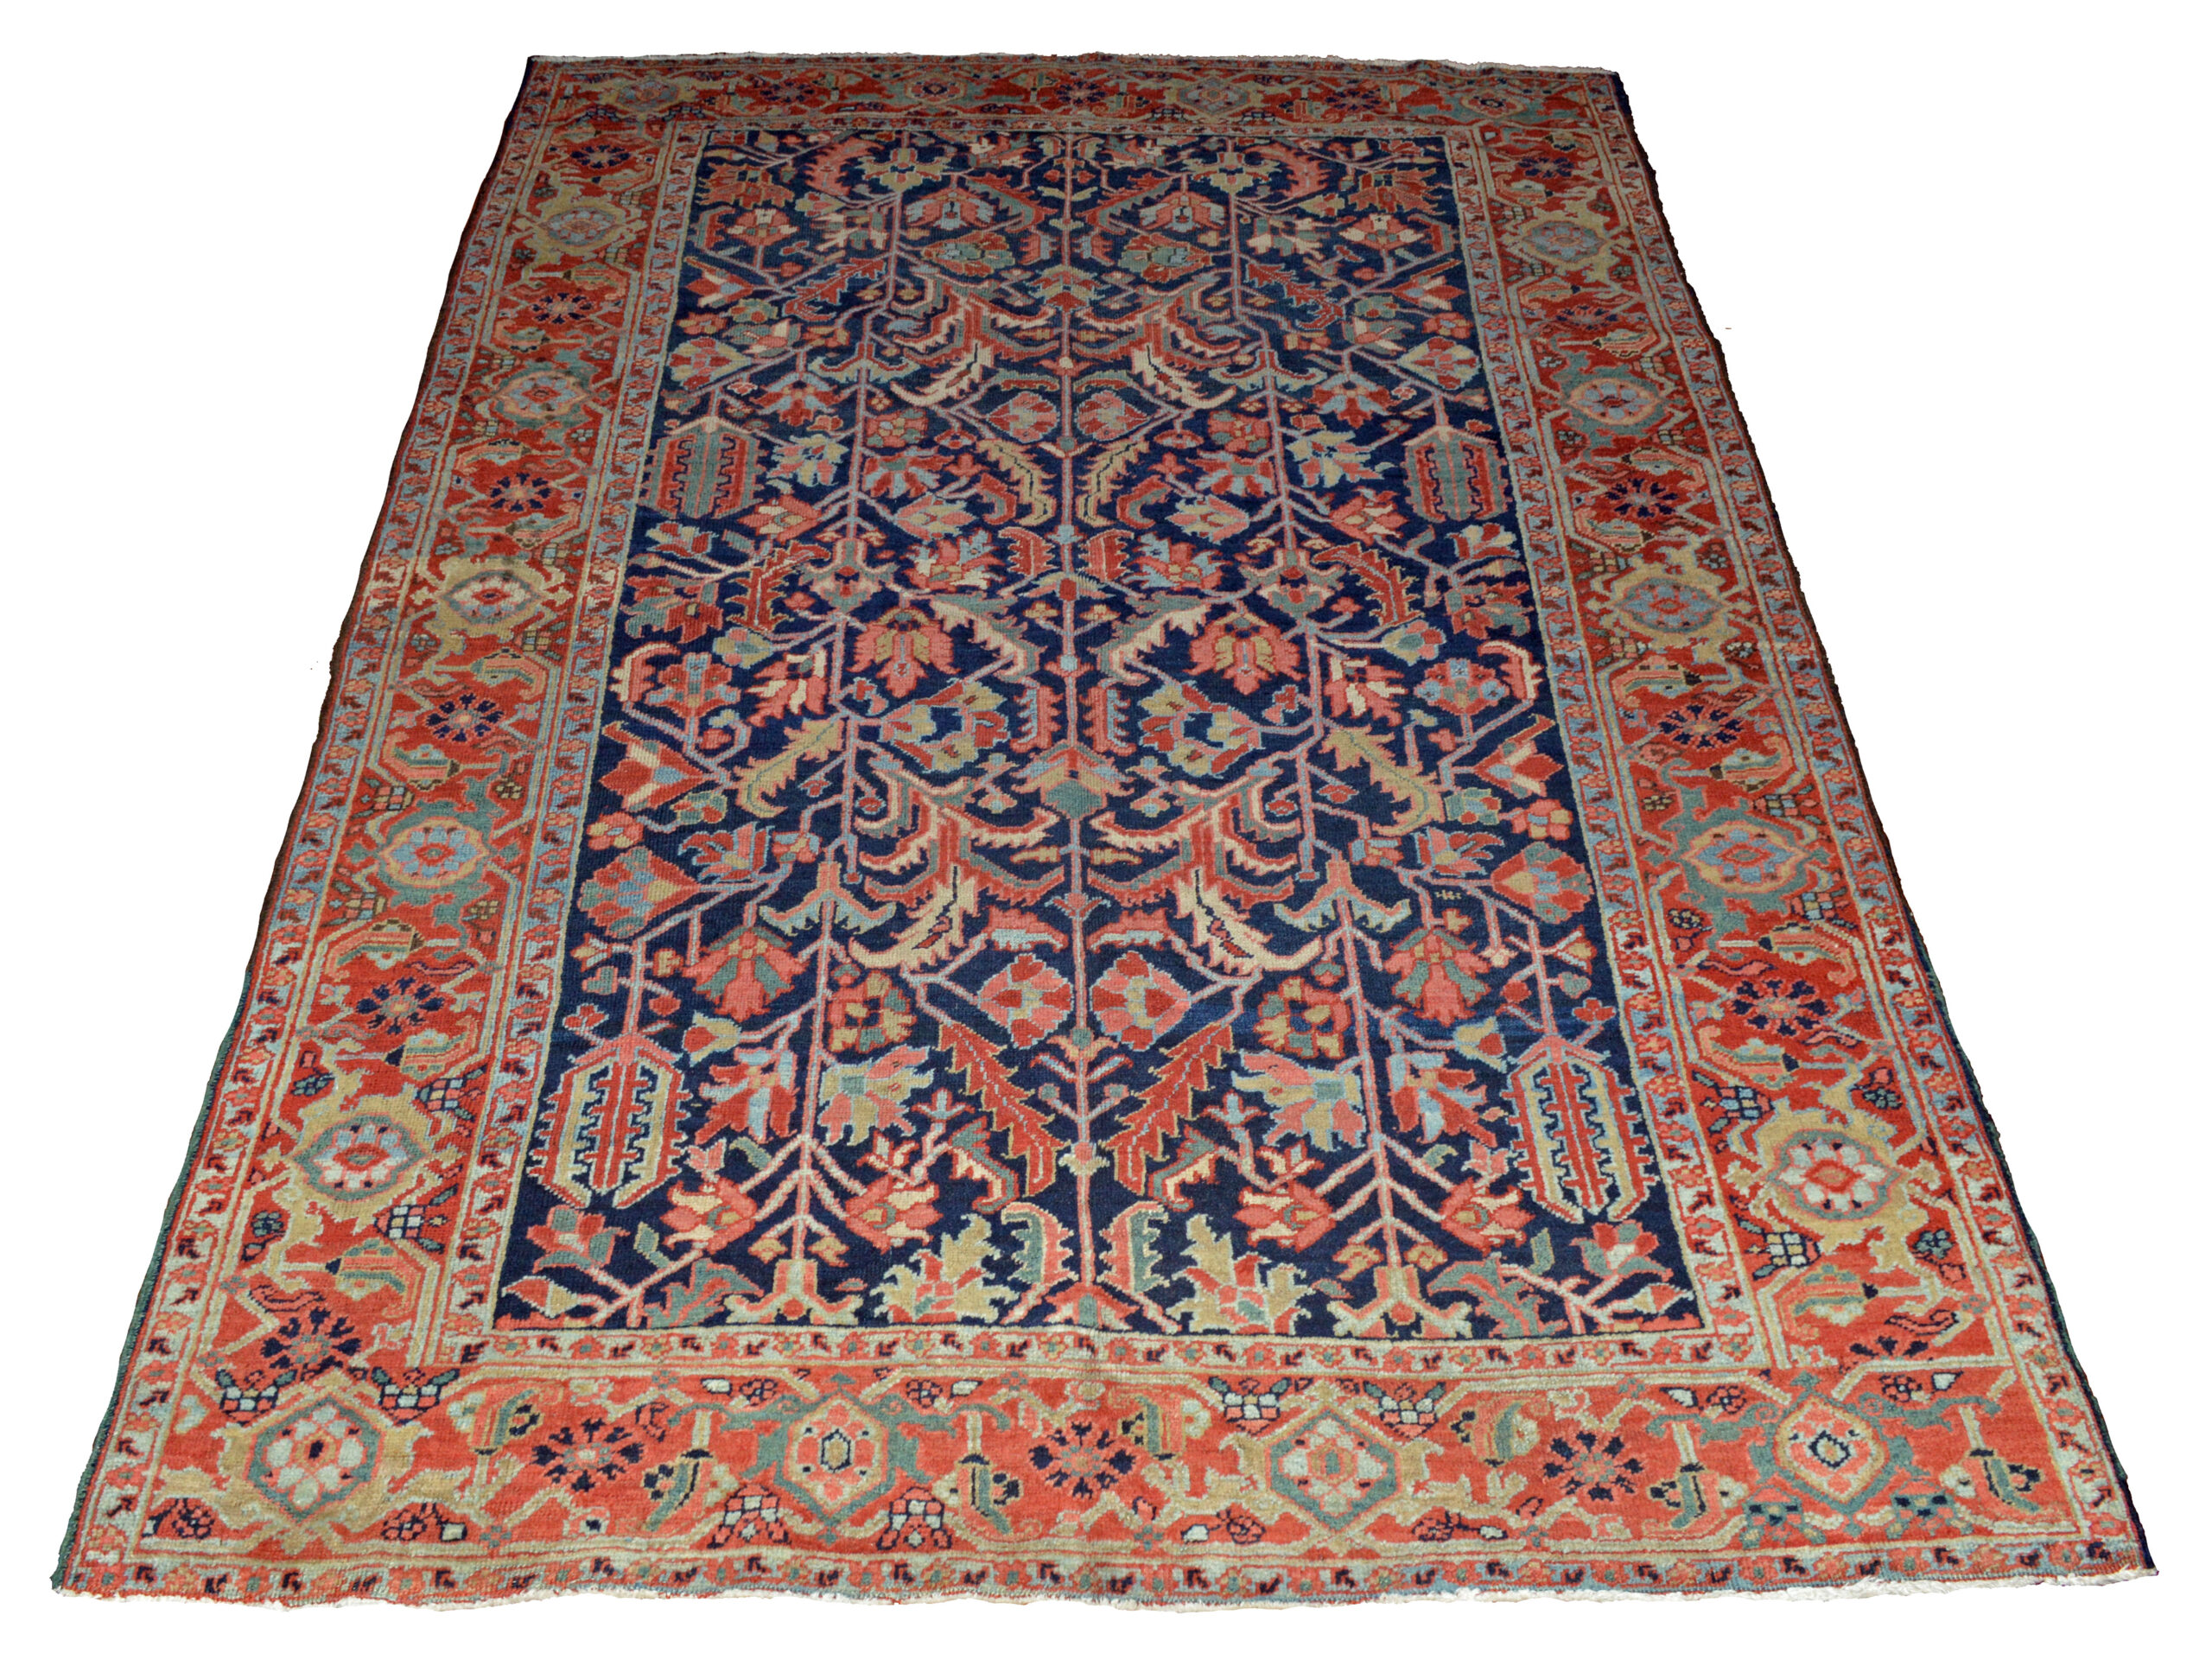 An antique Persian Heriz carpet, circa 1915, with an all-over design of stylized leaves and flowers on a navy blue field that is framed by a red border with the Turtle design. Douglas Stock Gallery is one of America's most selective dealers in antique Oriental rugs. Based near Boston in historic South Natick,MA, Douglas Stock Gallery is open by appointment or chance Monday to Saturday.